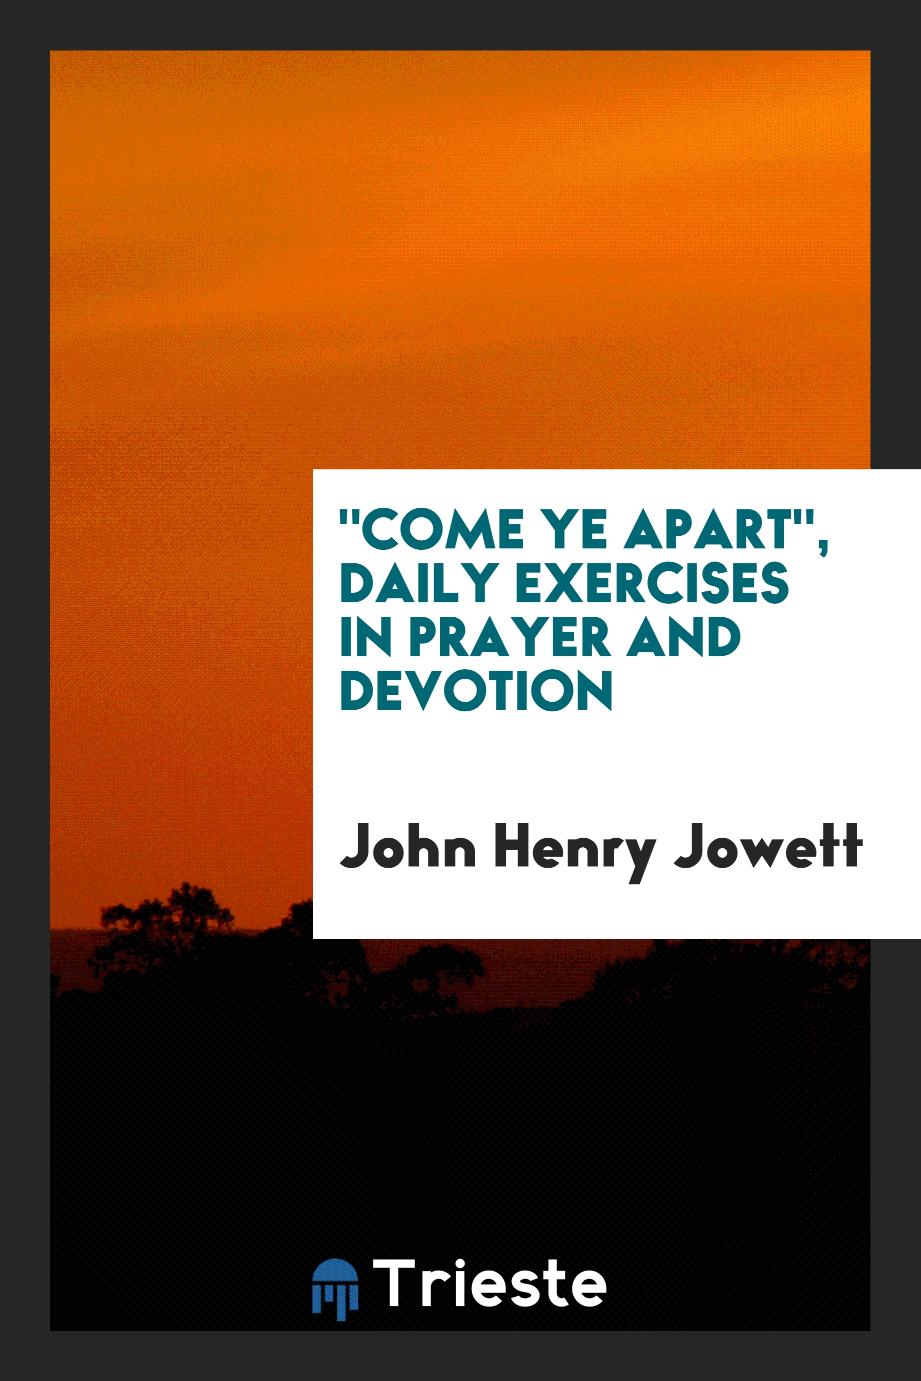 "Come ye apart", daily exercises in prayer and devotion